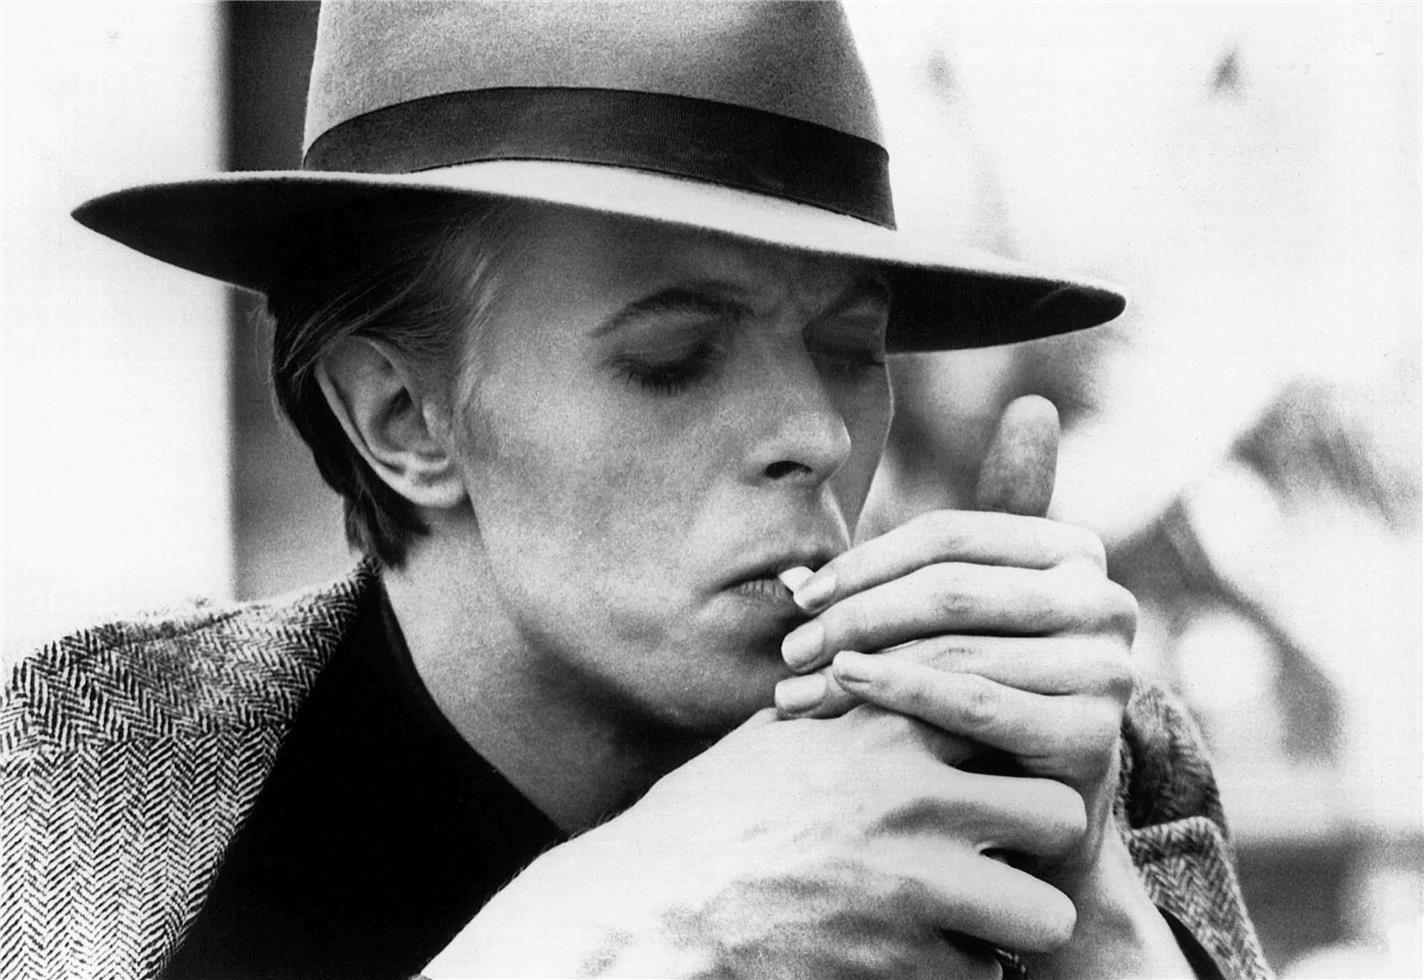 Geoff MacCormack Black and White Photograph - David Bowie on set, The Man Who Fell to Earth, 1975